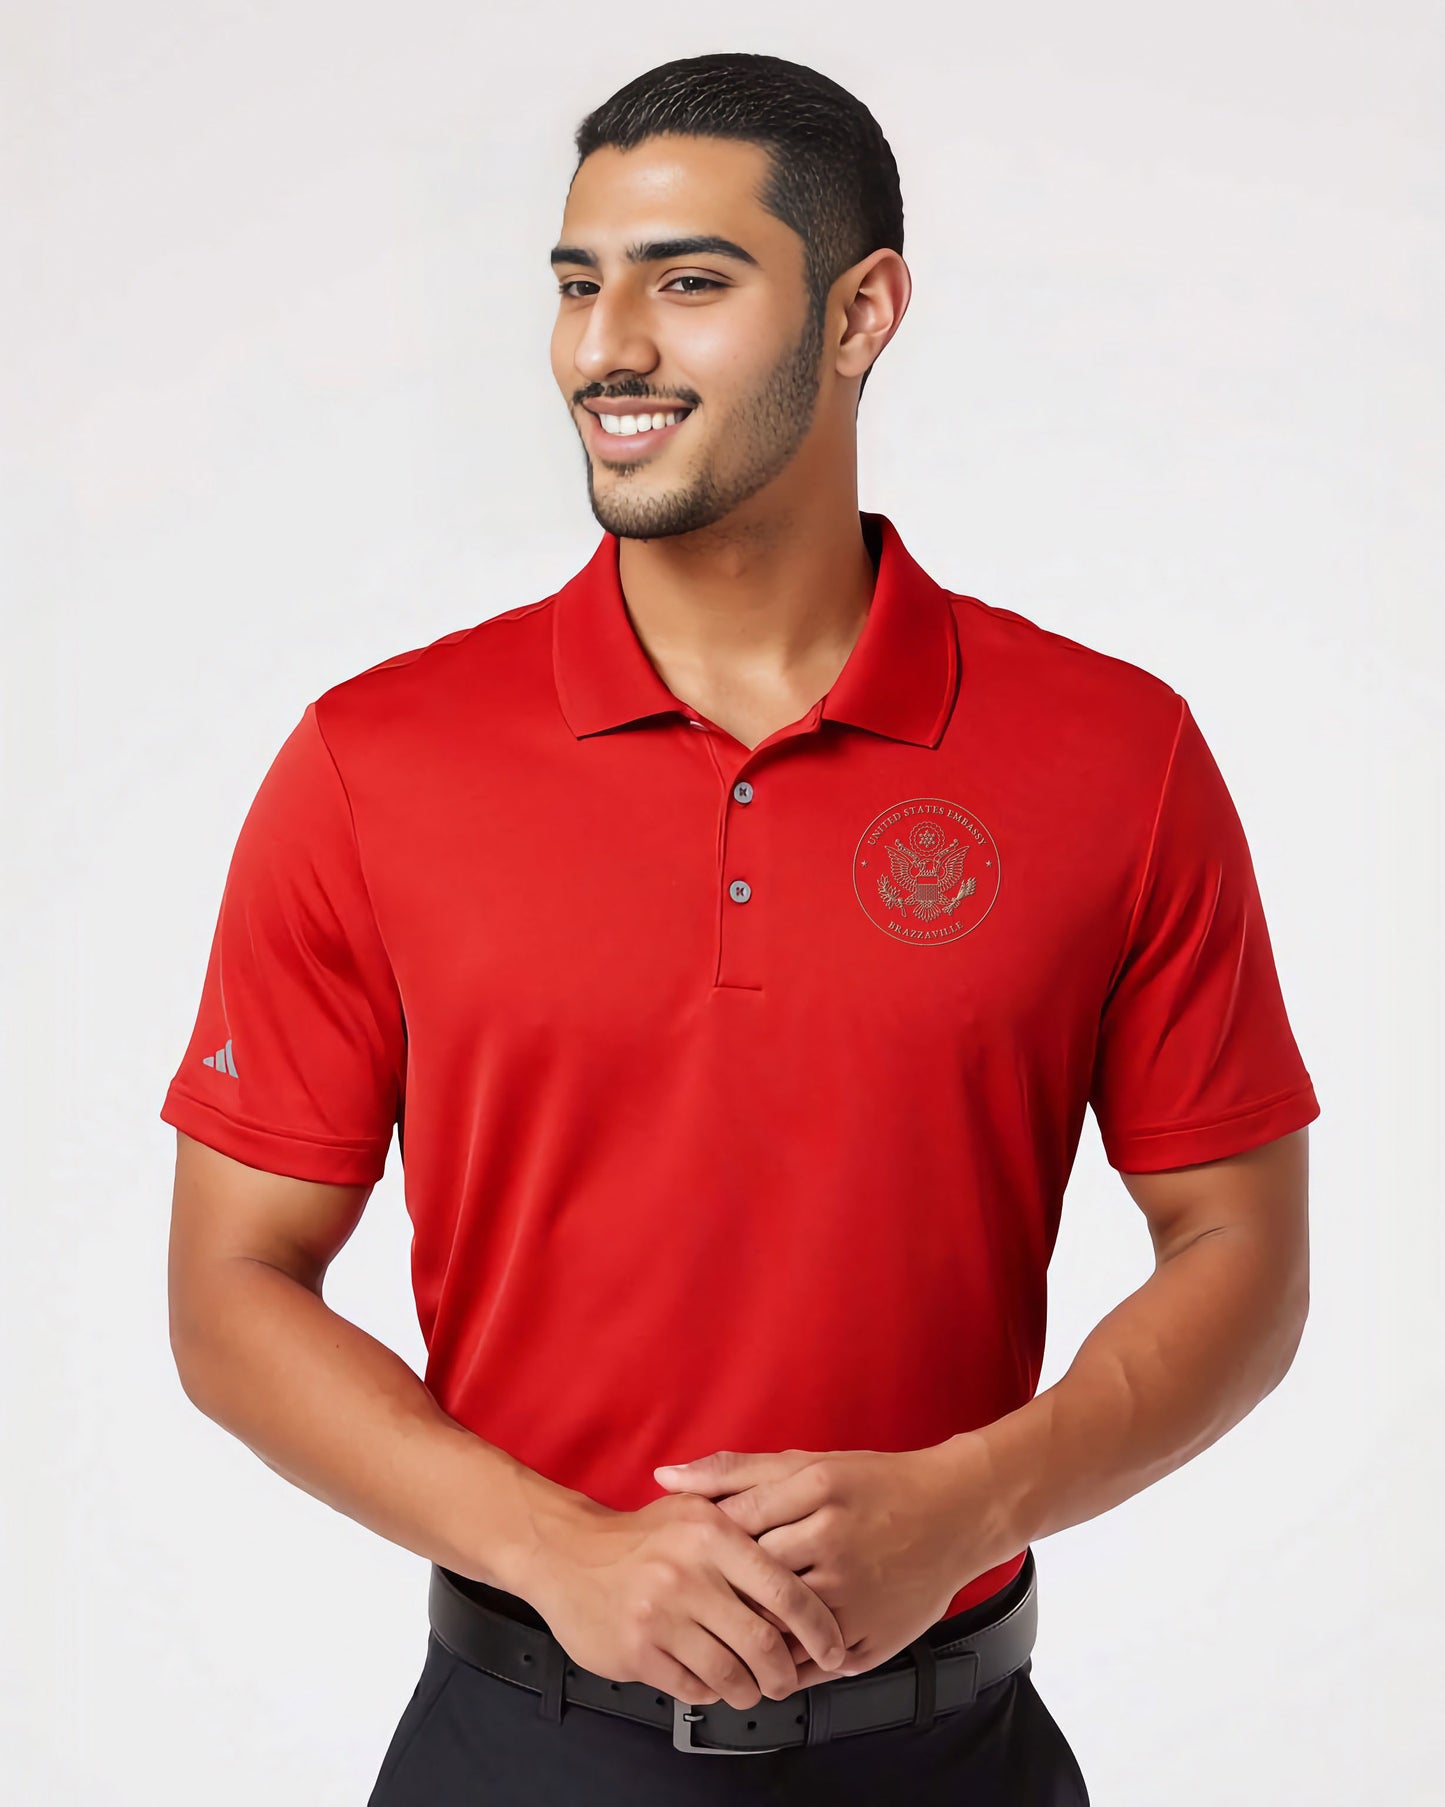 Adidas® Embroidered Polo, Gold Seal: Brazzaville